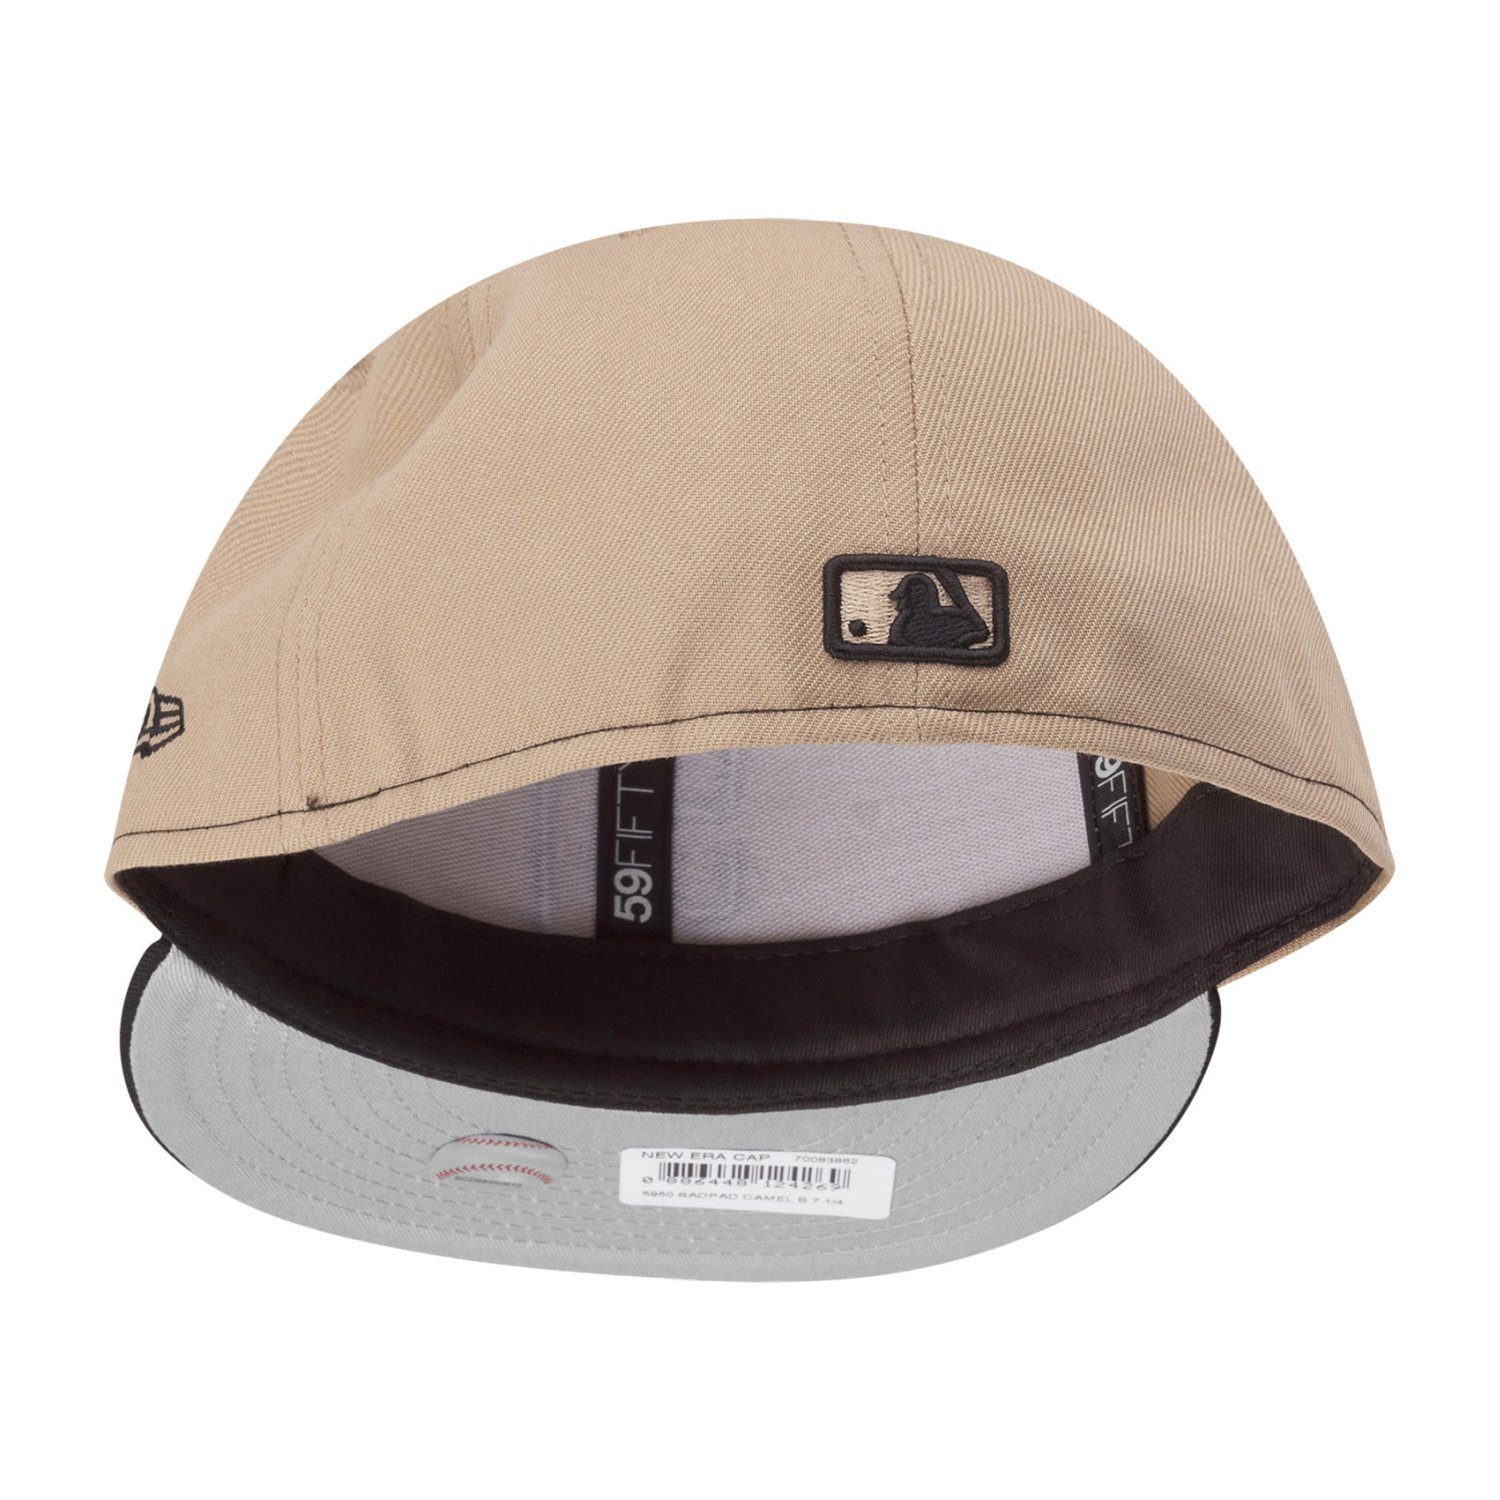 Fitted New MLB 59Fifty Era San Padres Cap Diego